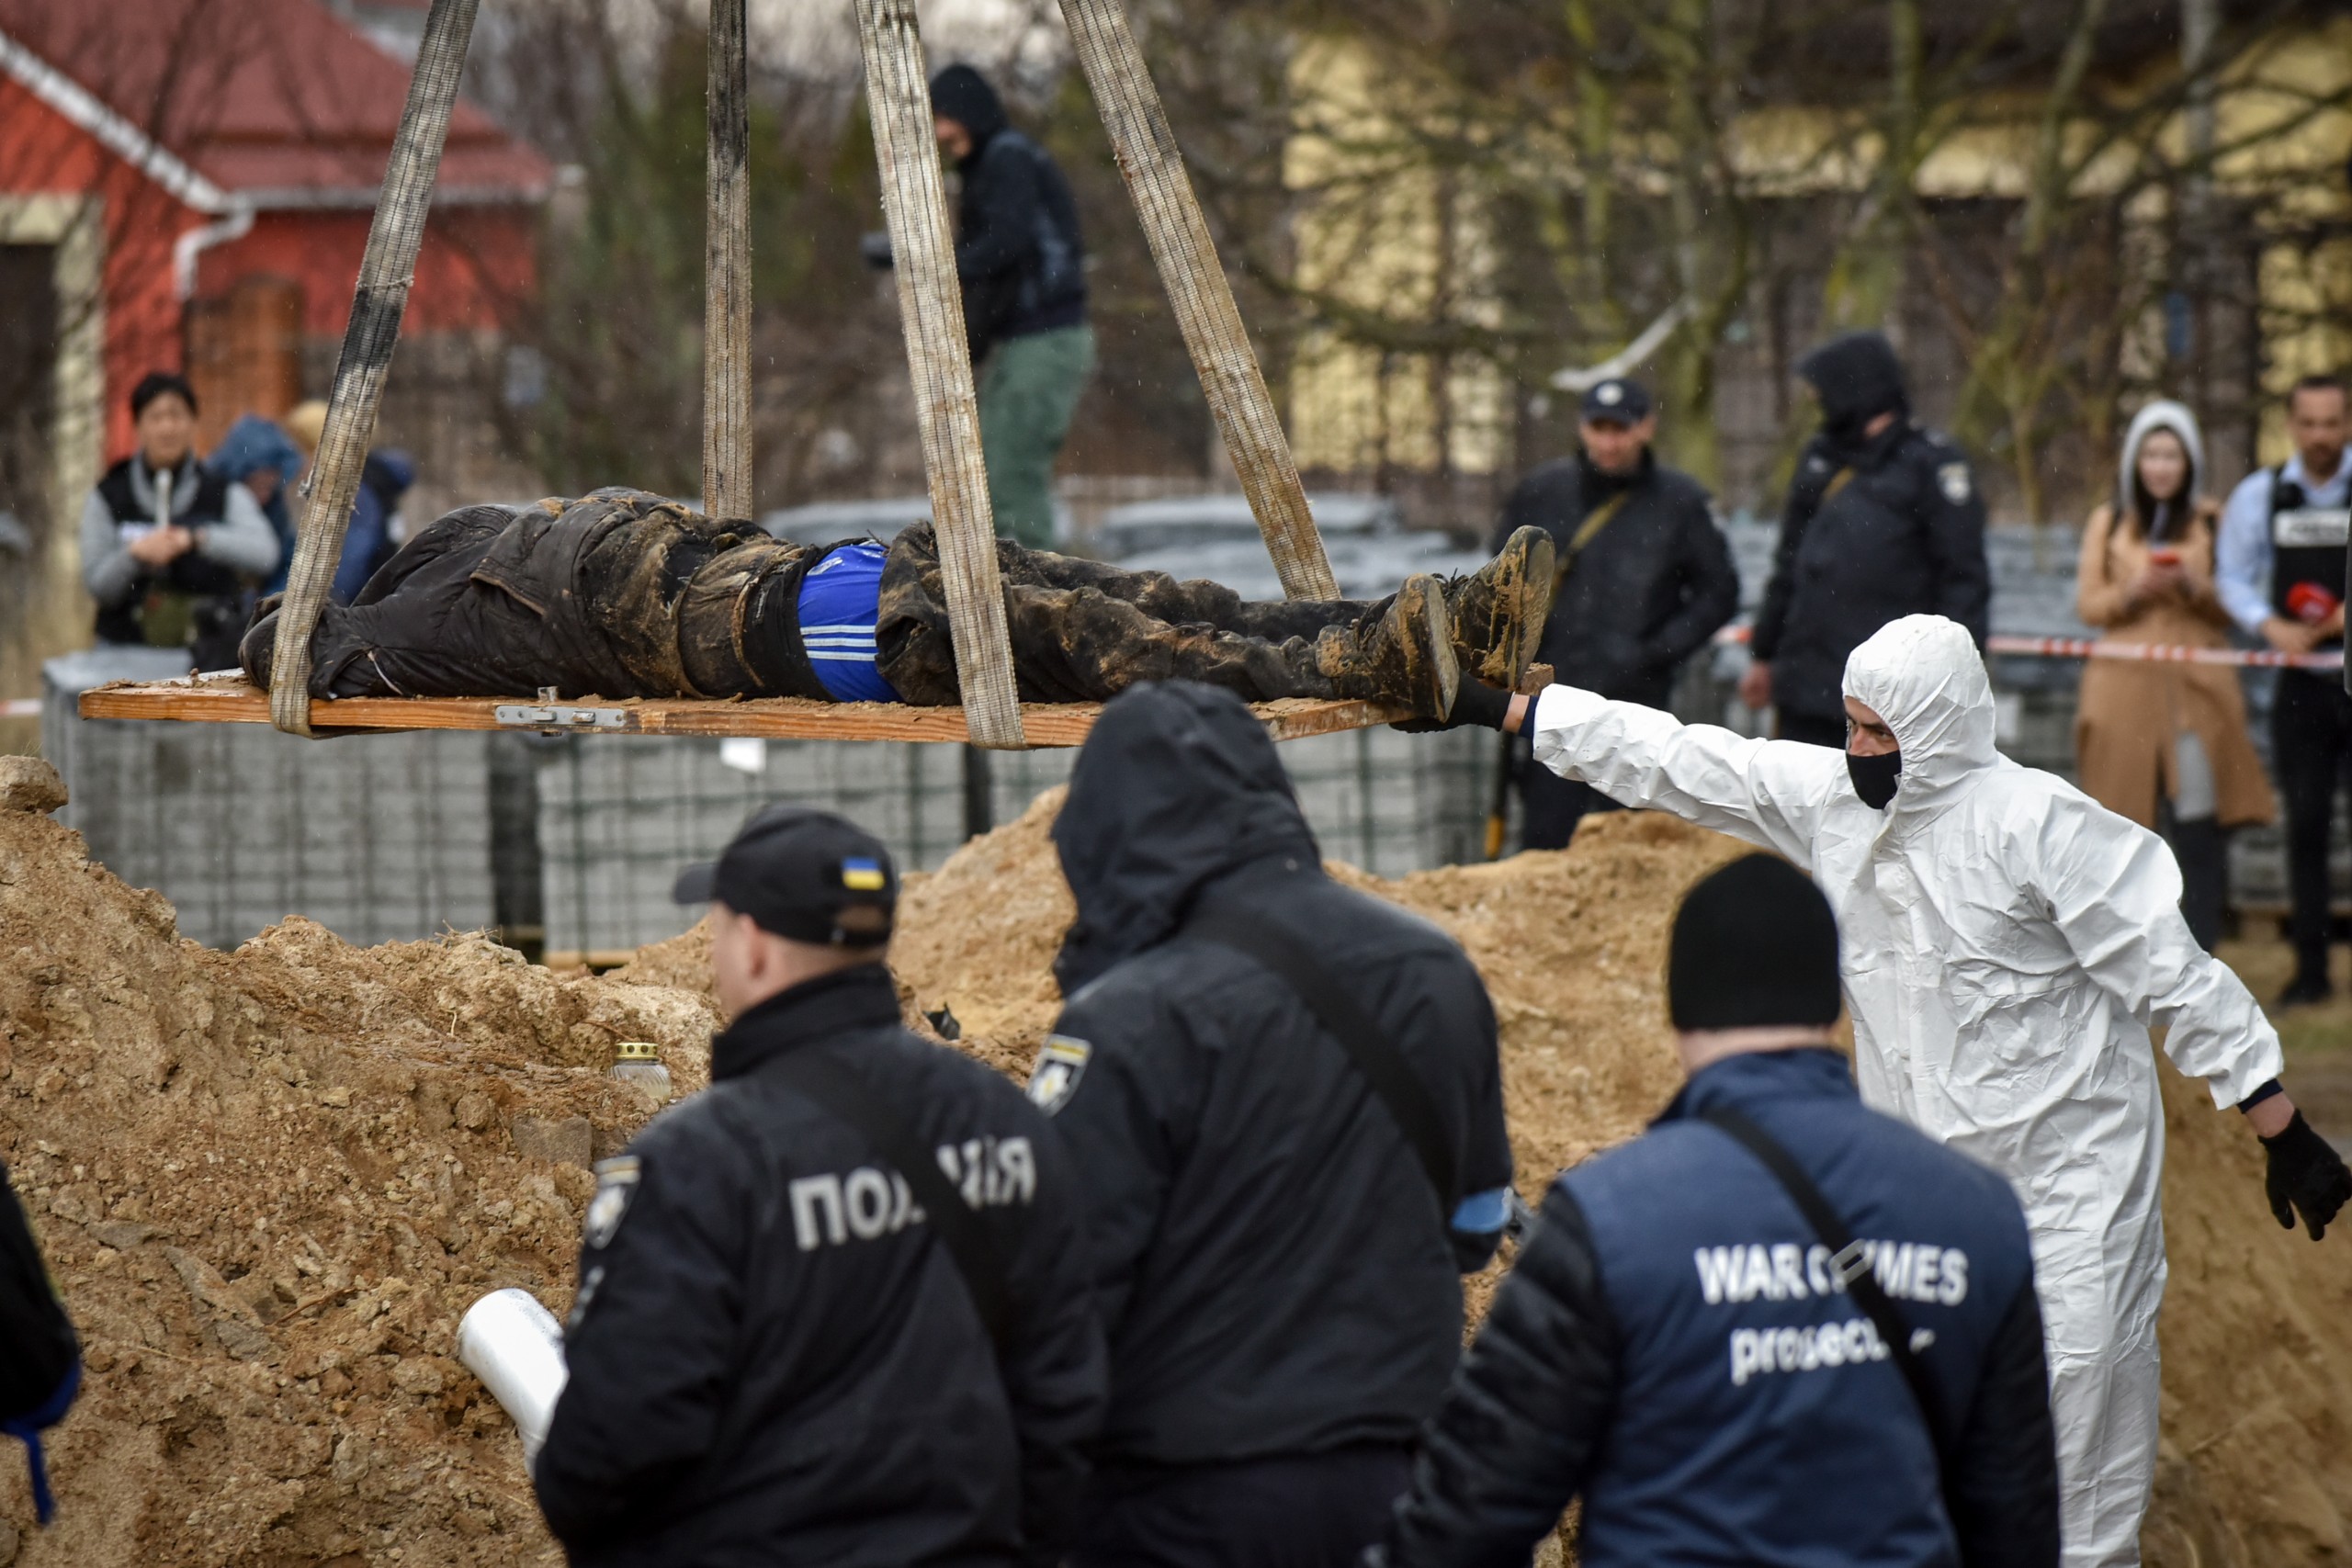 epa09878613 Police officers remove a body from a mass grave discovered in Bucha, outskirts of Kyiv (Kiev), Ukraine, 08 April 2022. Ukrainian authorities say that over 400 bodies were discovered following the Russian army’s retreat from towns surrounding Kyiv, prompting international calls for a probe into possible war crimes committed by Russia.  EPA/OLEG PETRASYUK